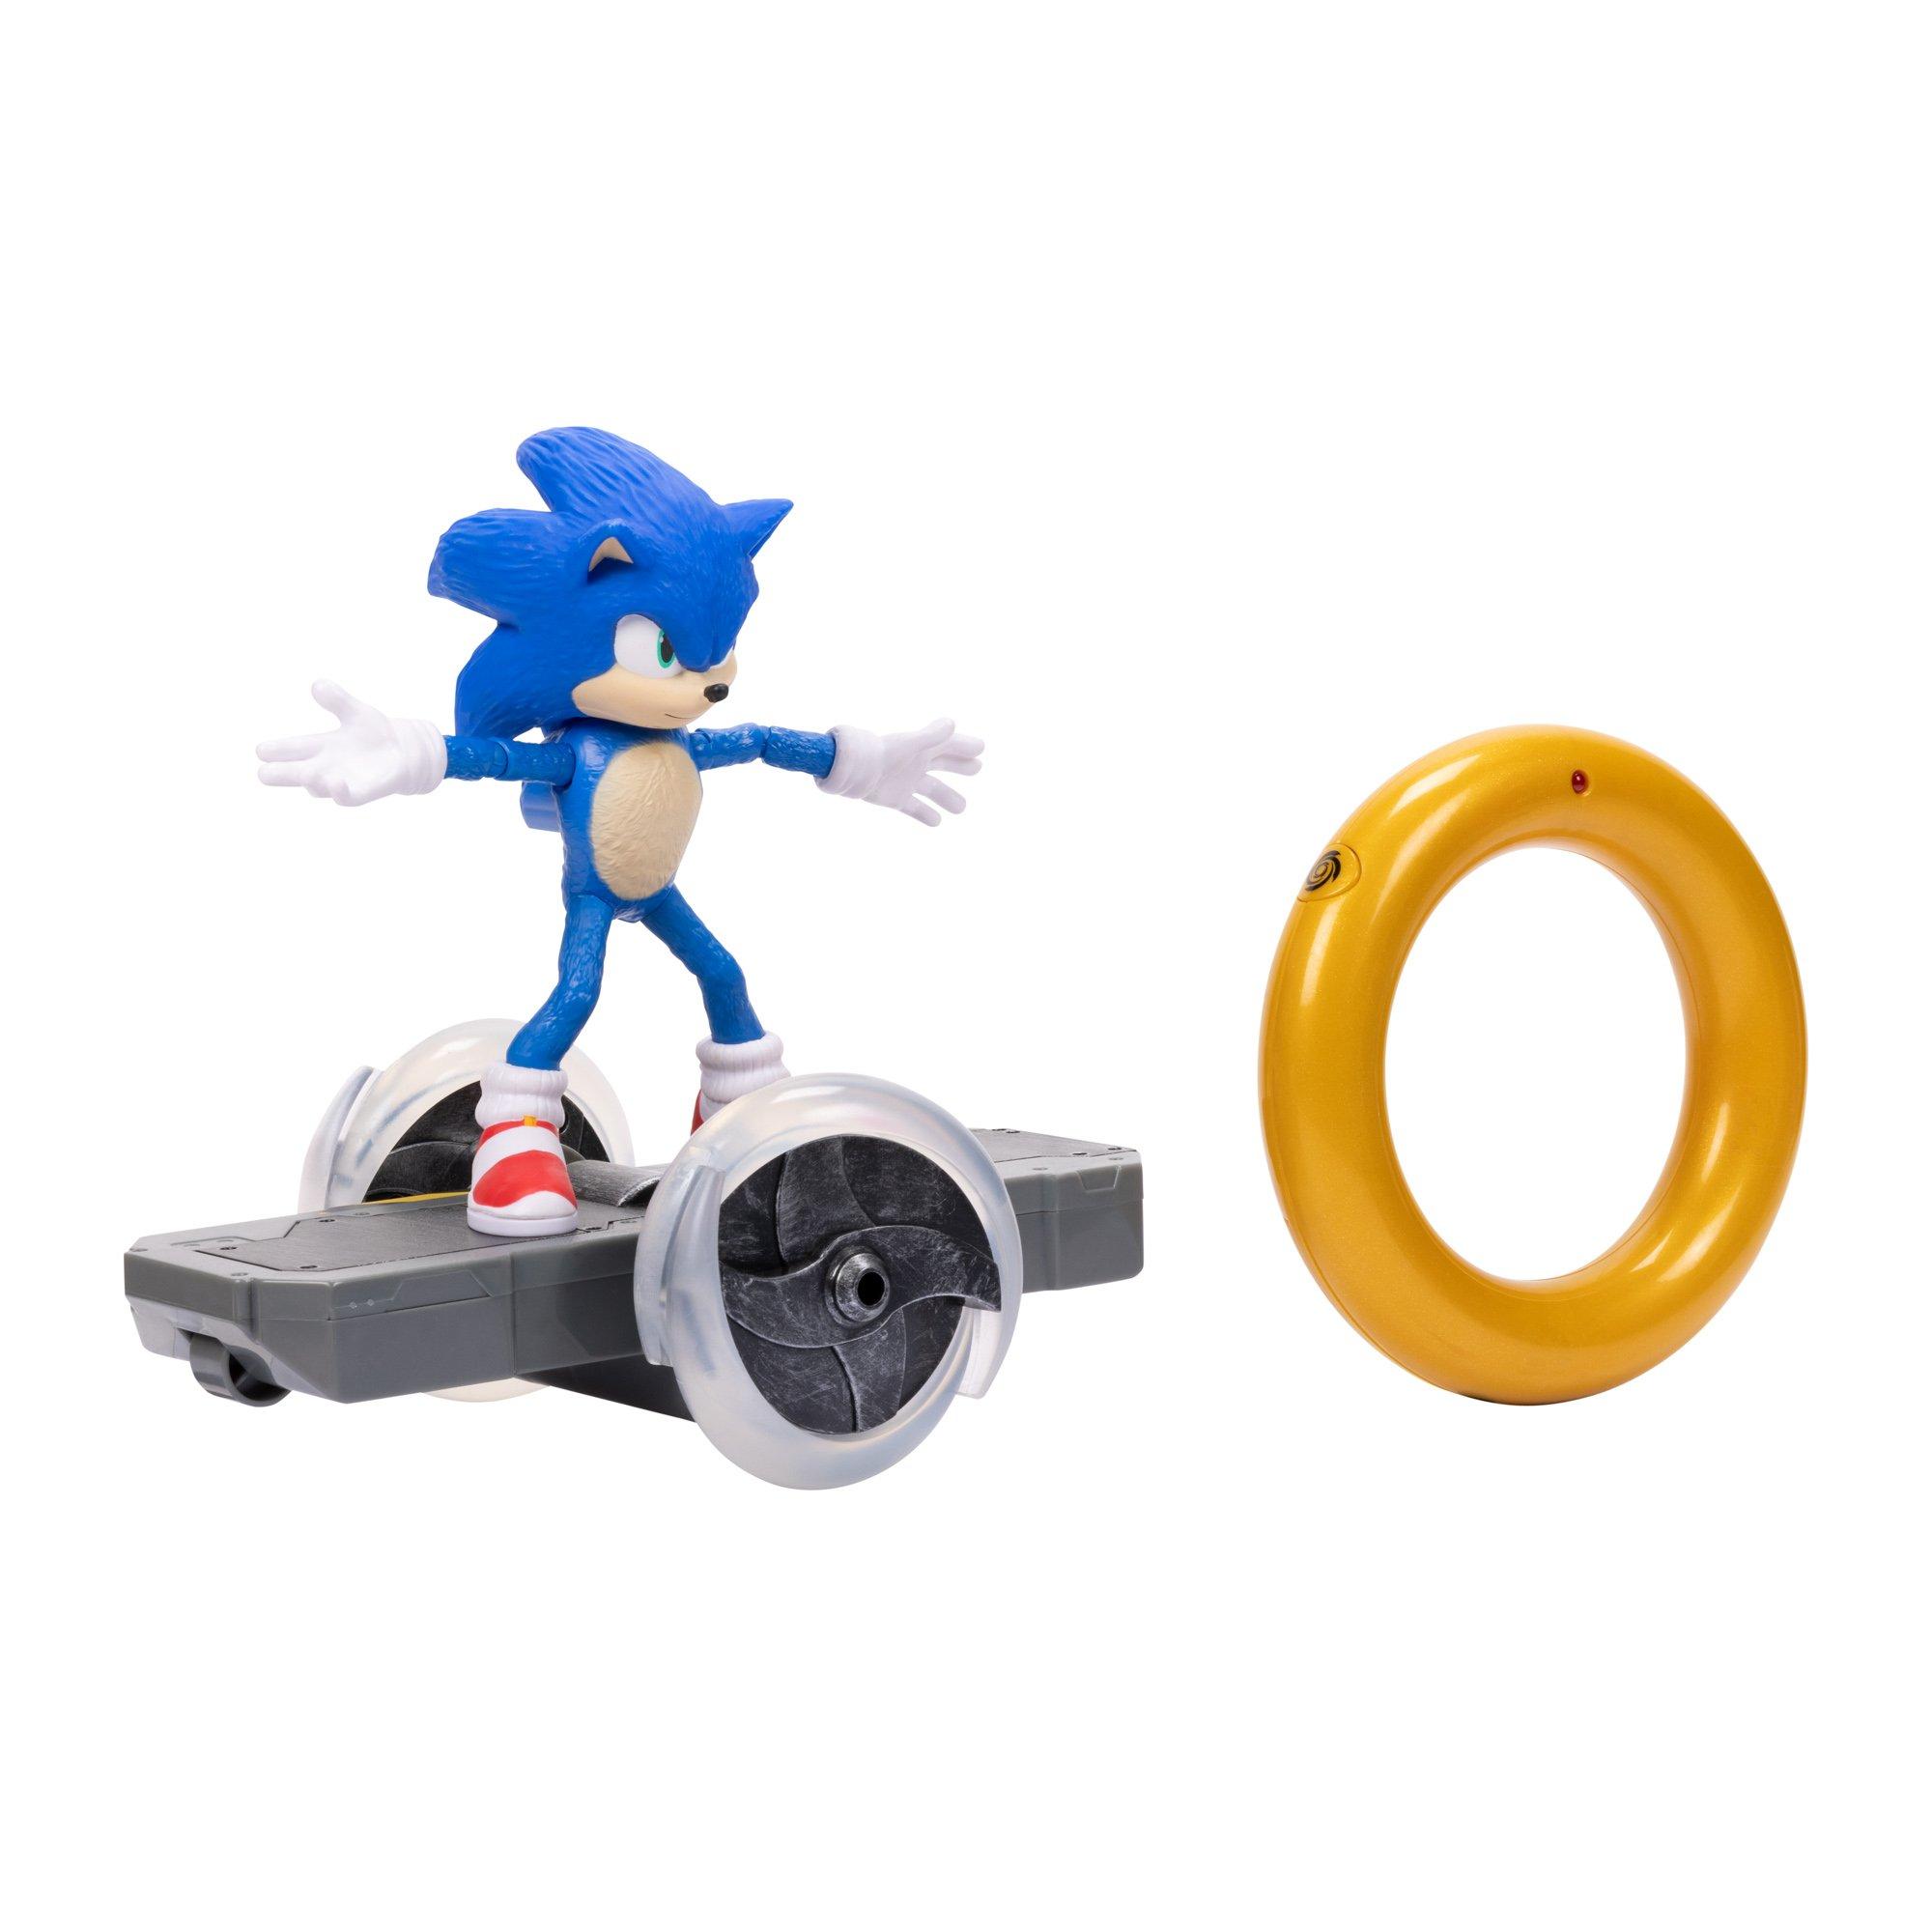  Sonic the Hedgehog 2 The Movie 4 Articulated Action Figure  Collection (Sonic) : Toys & Games